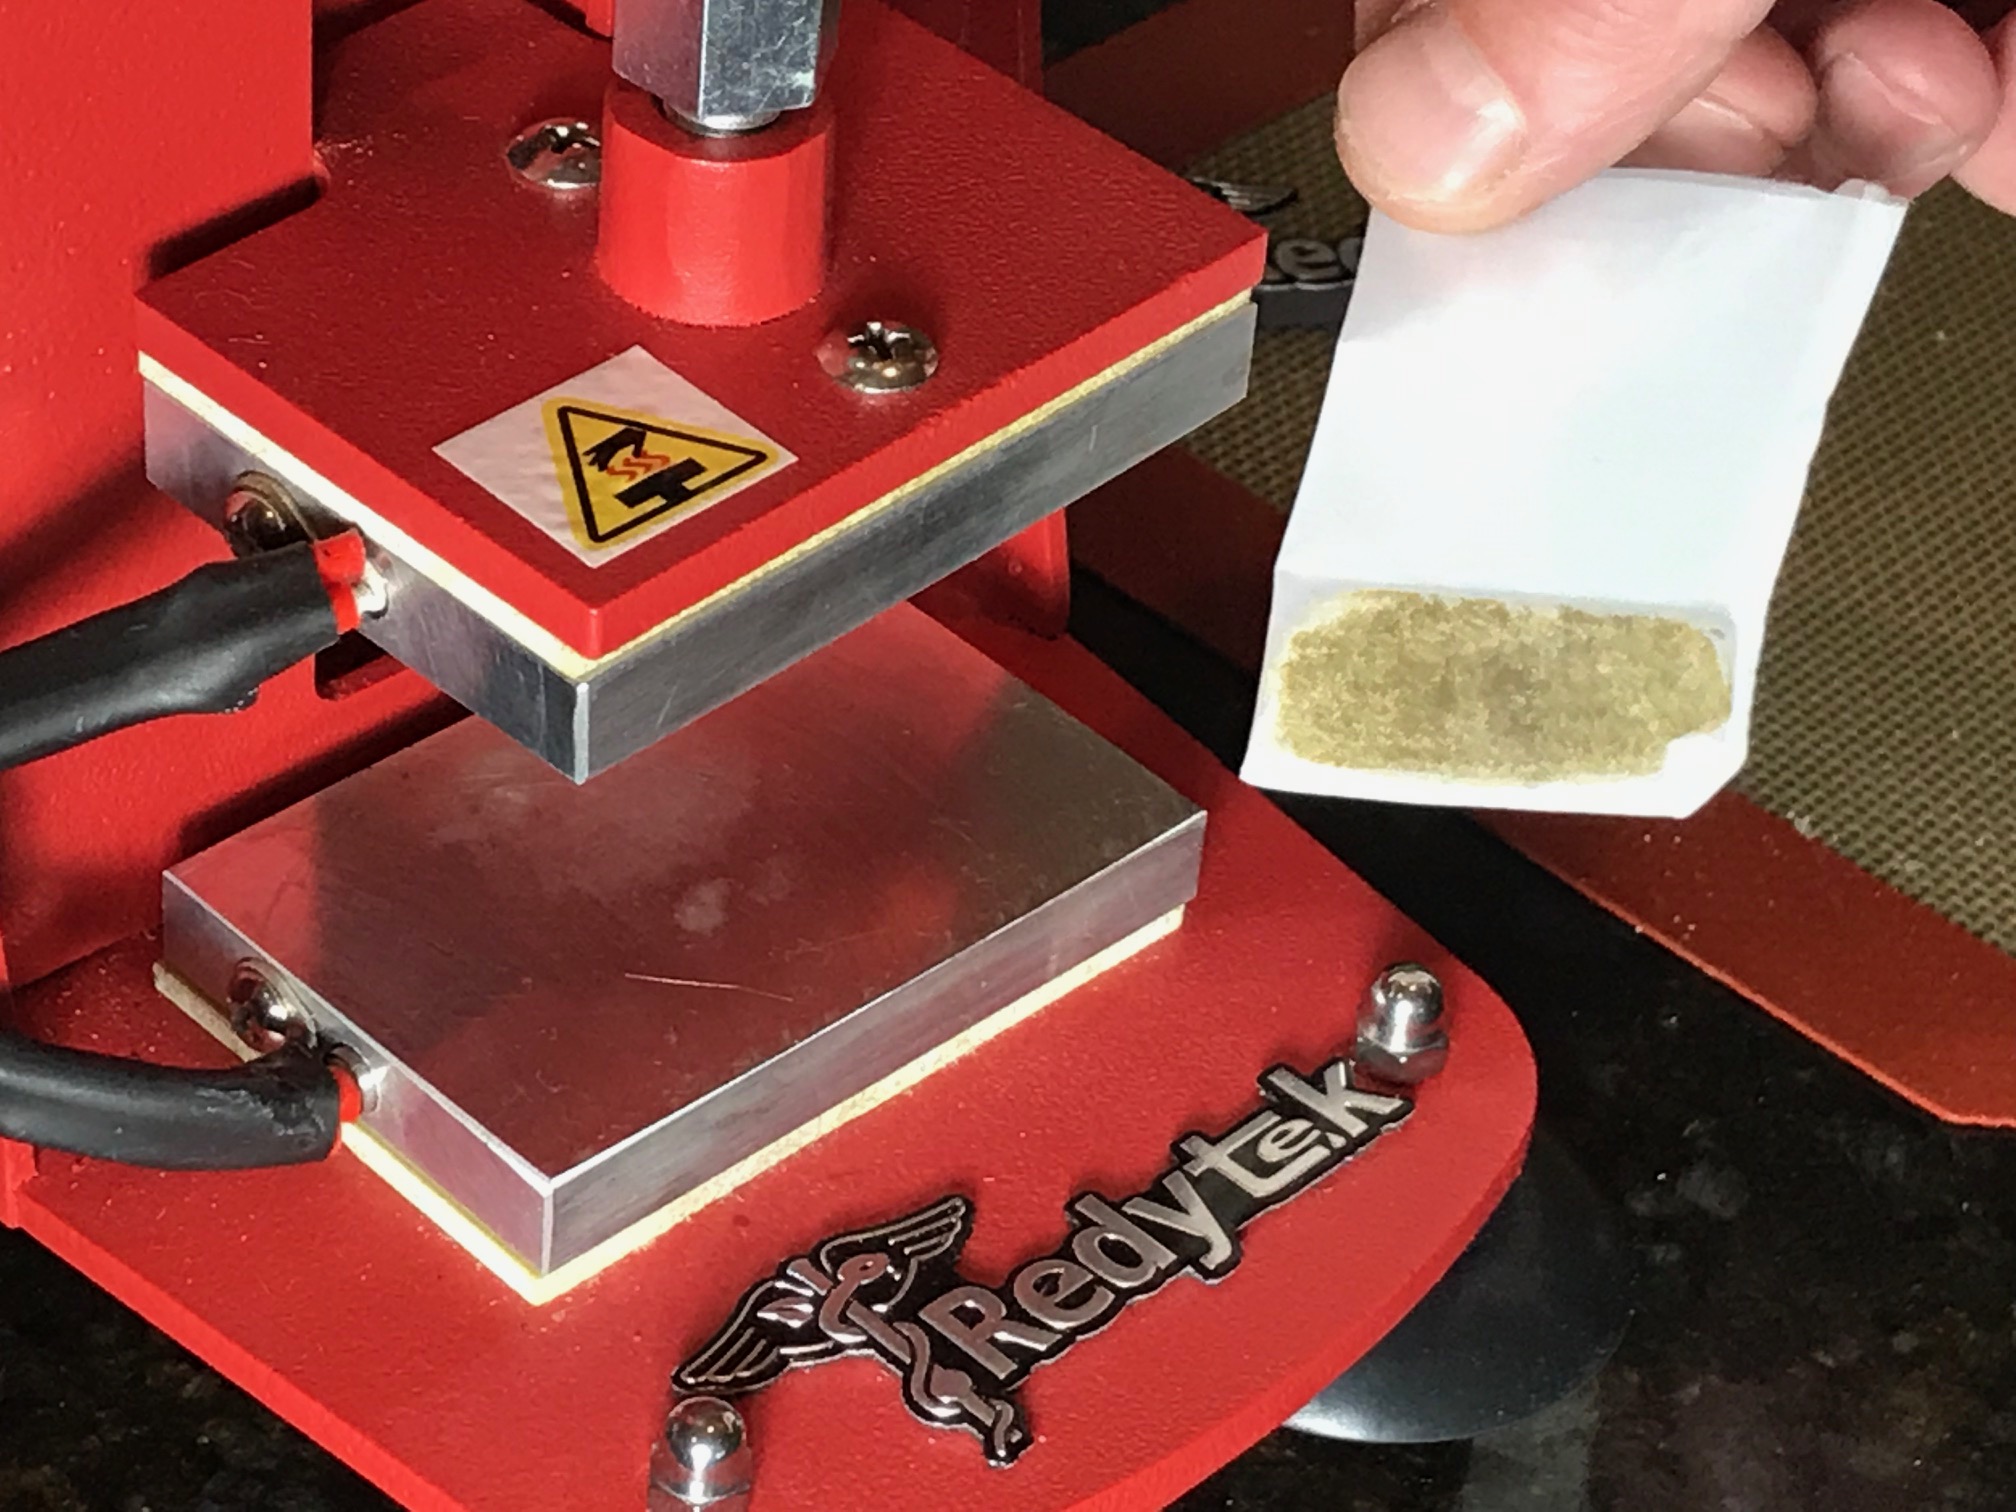 Prepare bubble hash in a 24 micron Redytek rosin filter bag for best results with highest quality returns.